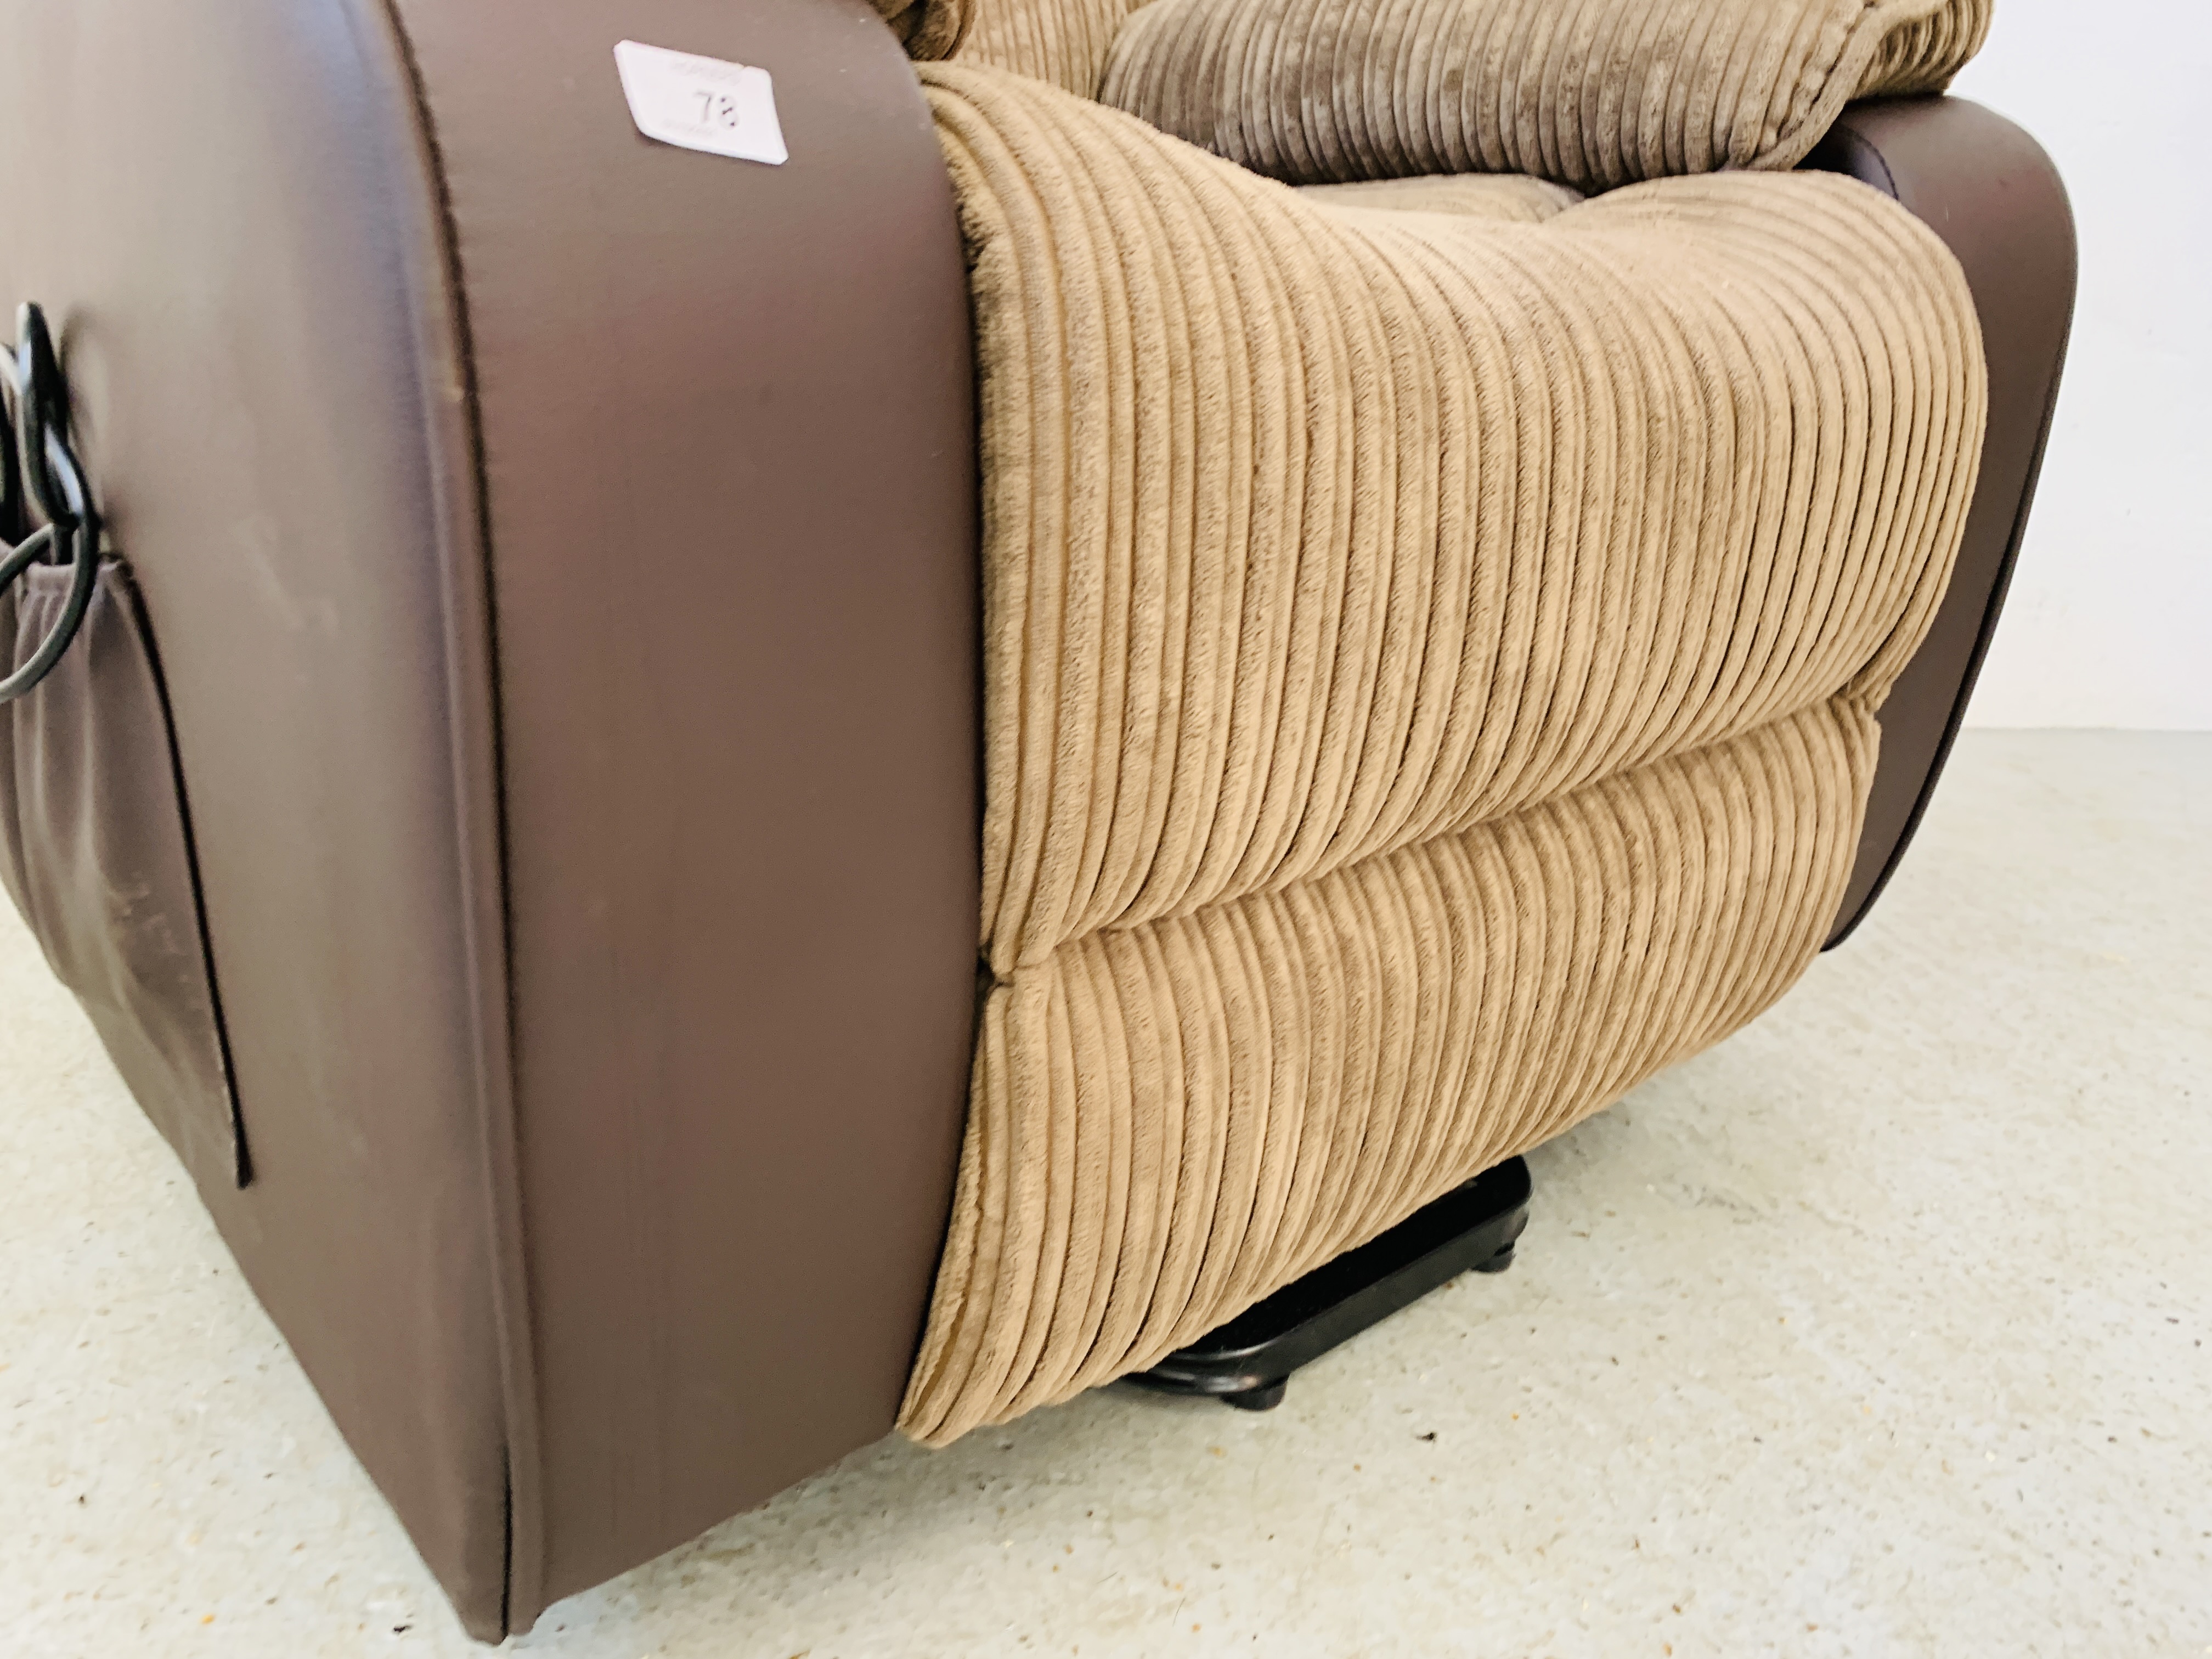 A MODERN ELECTRIC RECLINING EASY CHAIR WITH BROWN FAUX LEATHER AND BROWN CORDED UPHOLSTERY - SOLD - Image 4 of 6